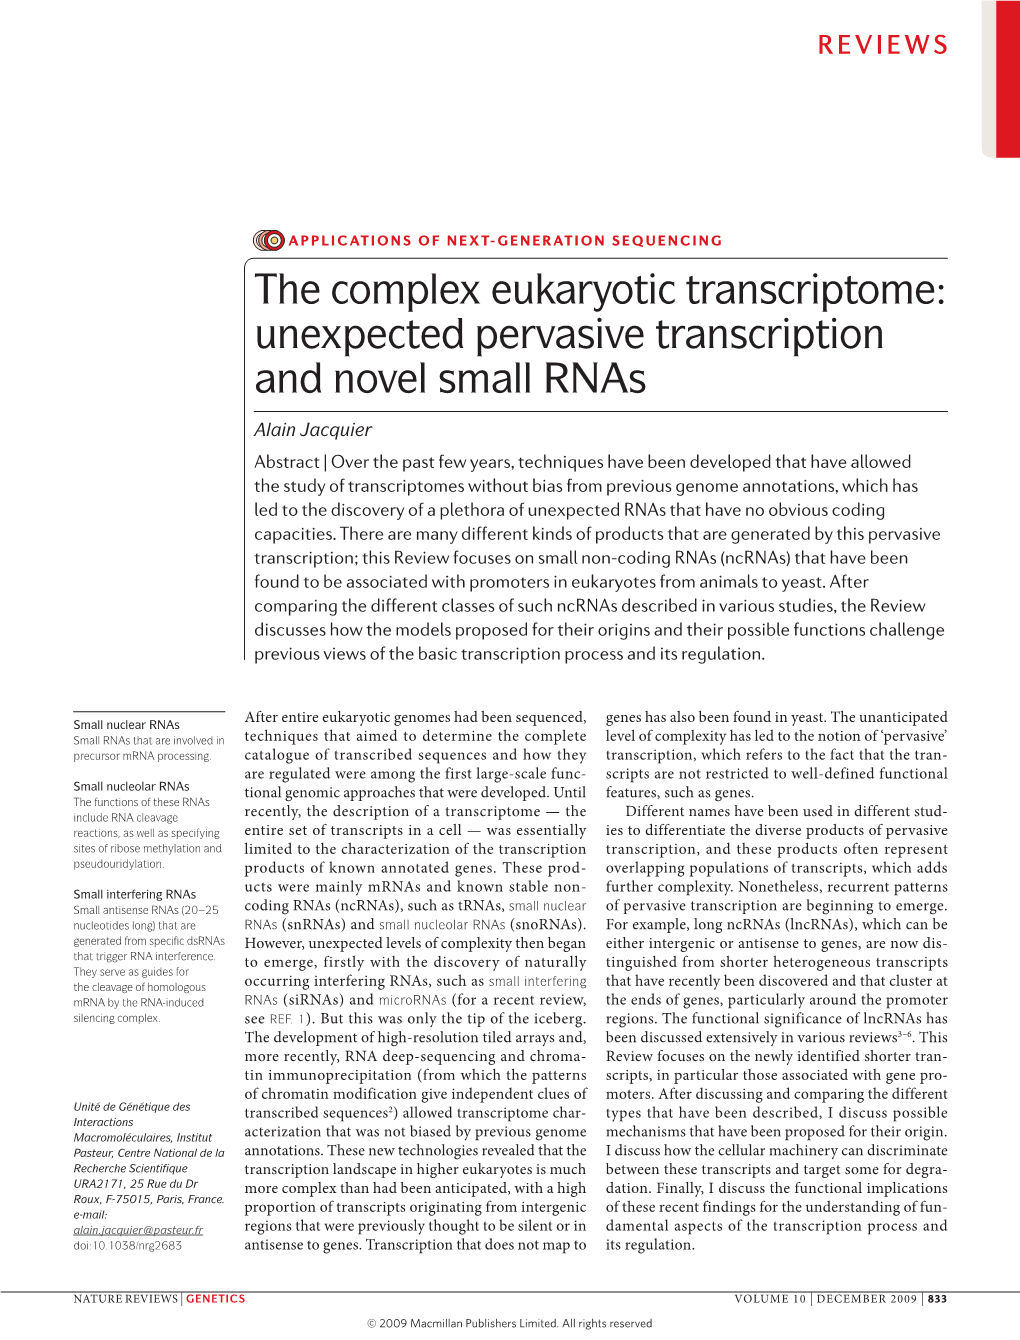 Applications of Next-Generation Sequencing: the Complex Eukaryotic Transcriptome: Unexpected Pervasive Transcription and Novel S